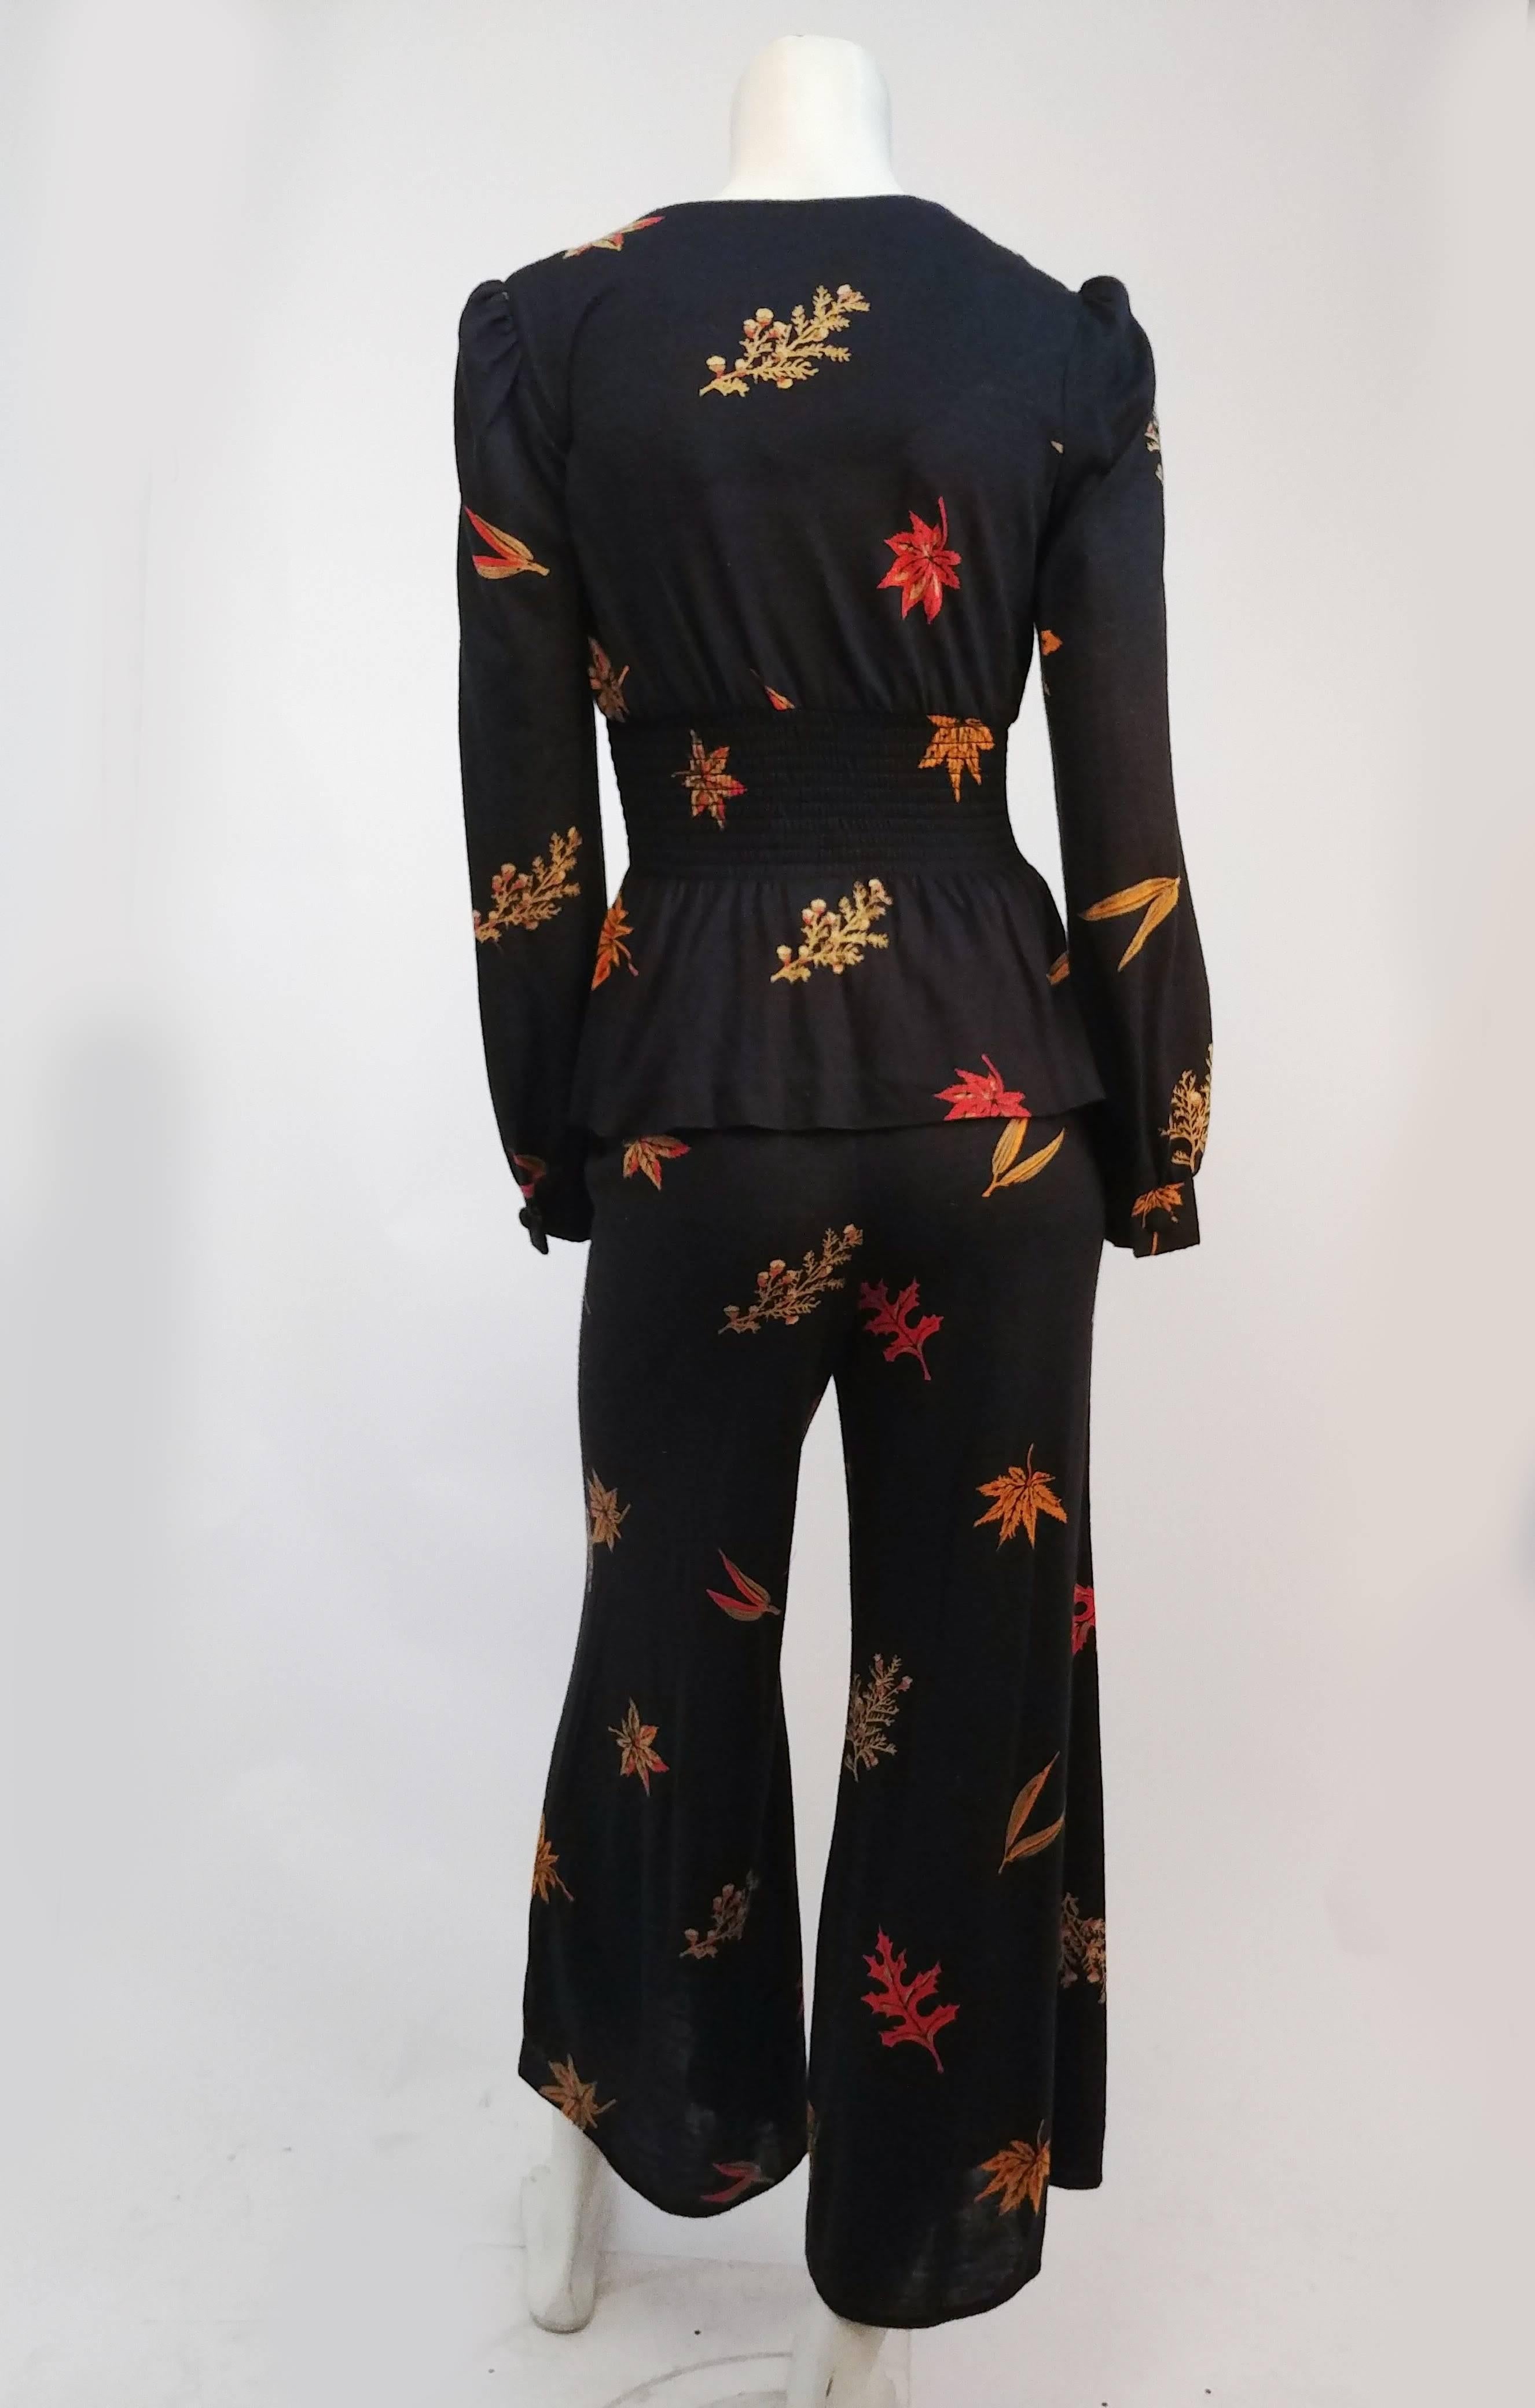 Women's 1970s Knit Two Piece Top & Pant w/ Printed Maple Leaves For Sale